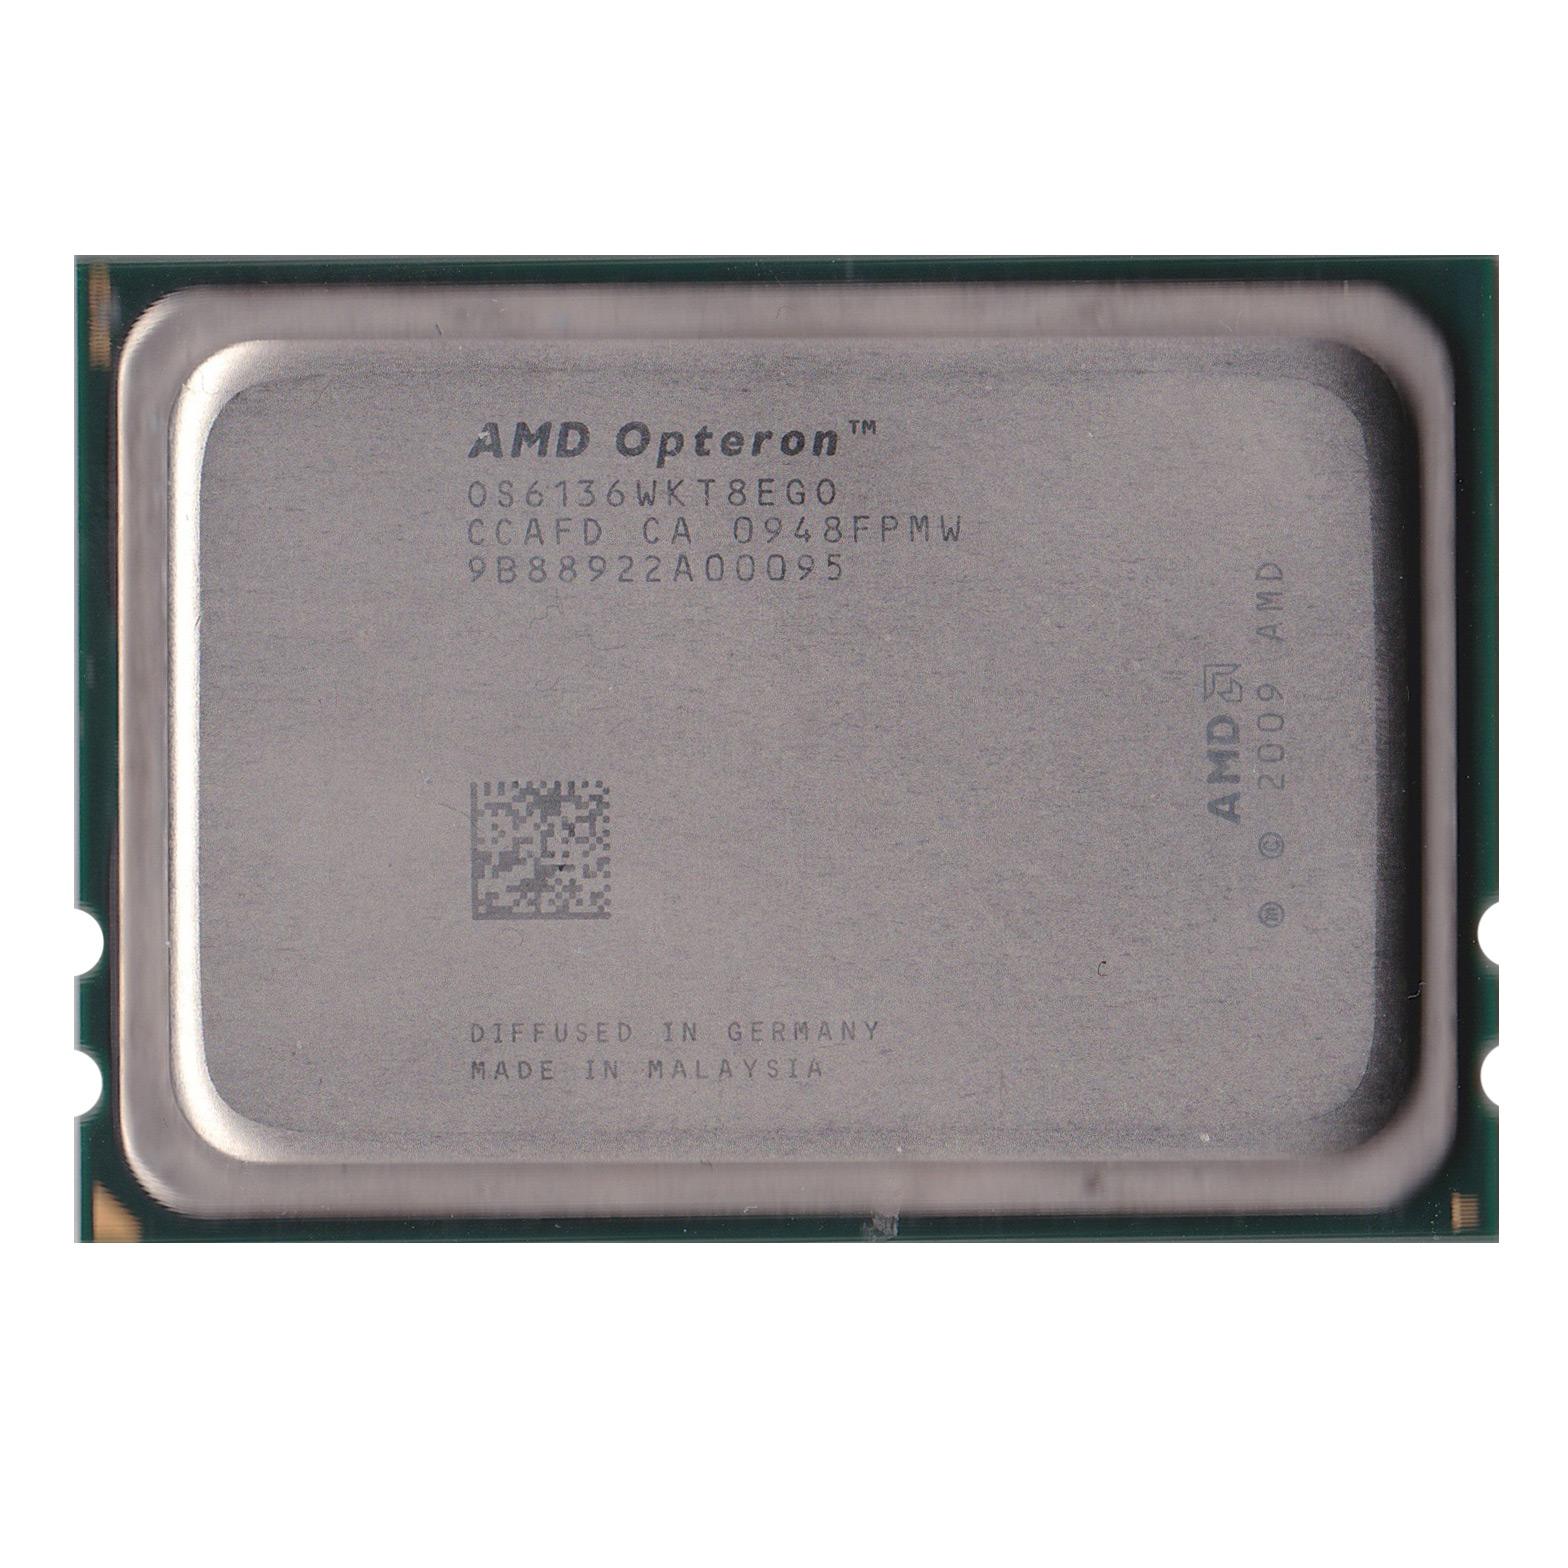 AMD Opteron 6136 2.4 GHz 8-Core Server Processor - Socket G34, Excellent Condition, Tested - Free International Shipping